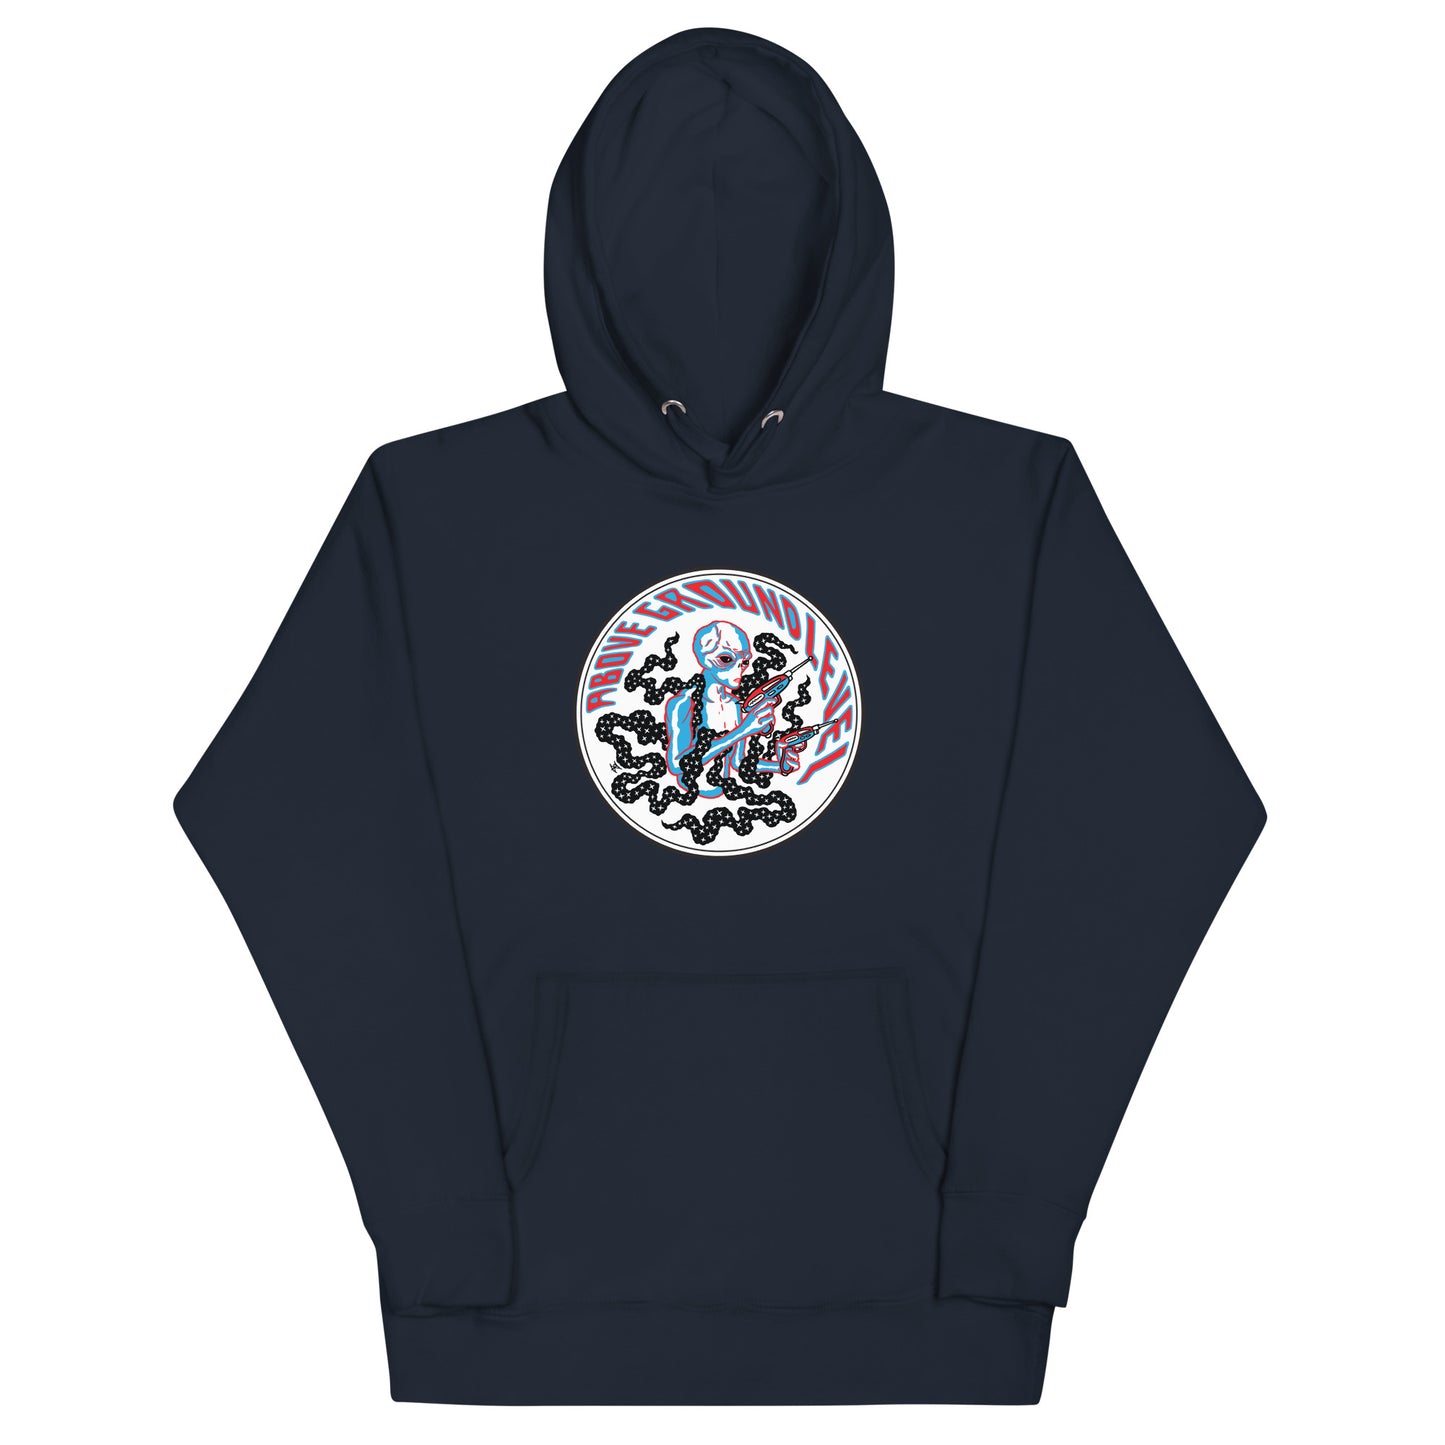 AGL Discs - Unisex Hoodie (with AGLien design by Ryan Koster)